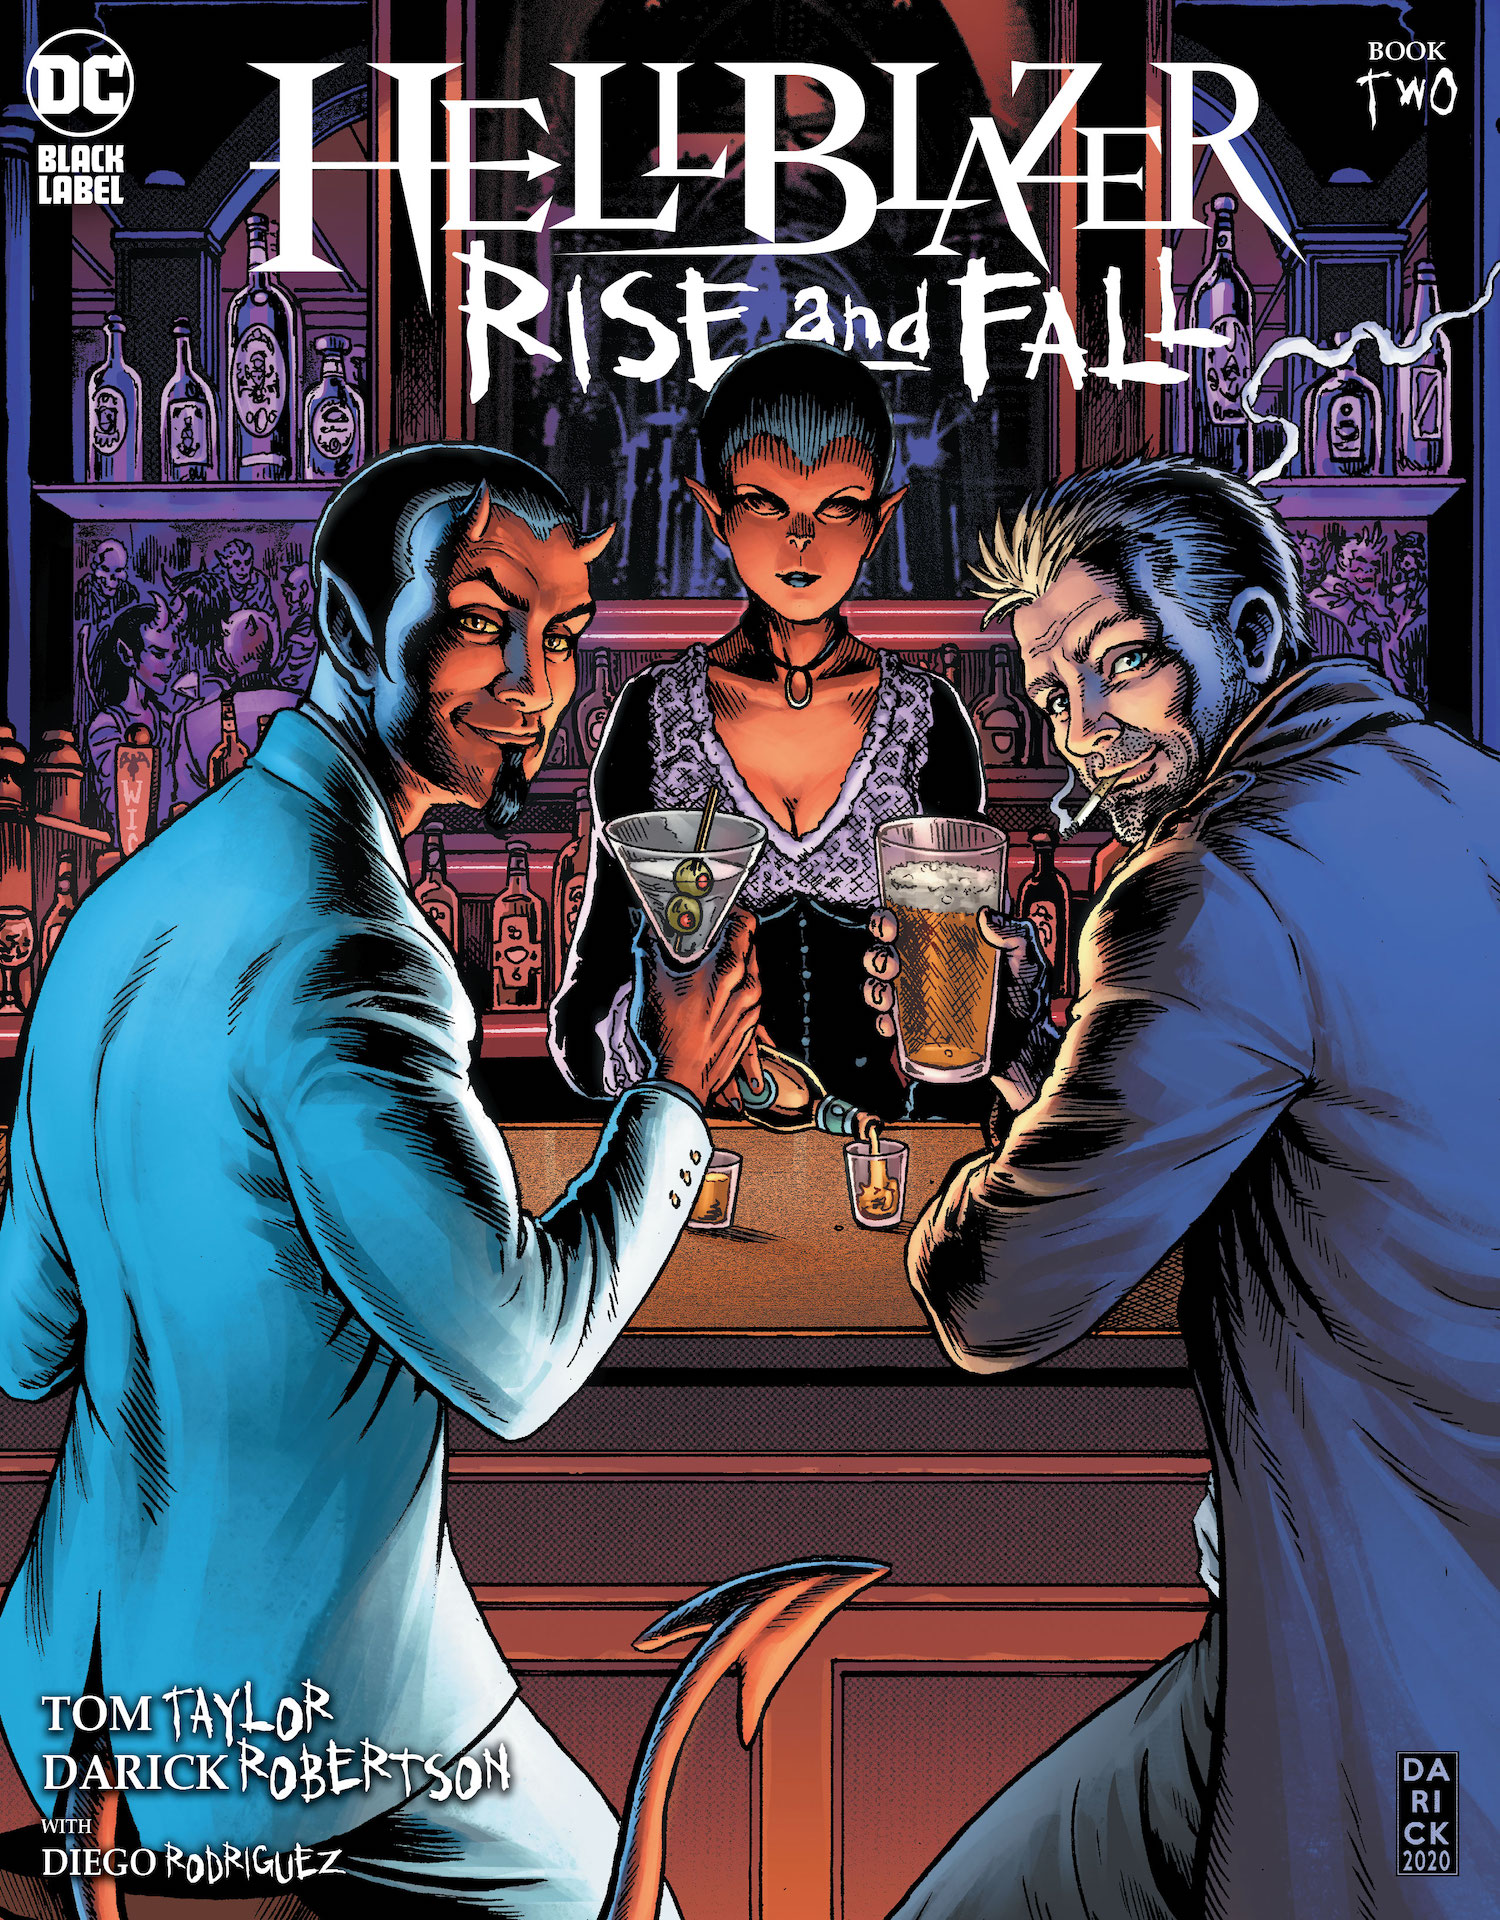 DC Preview: Hellblazer: Rise and Fall #2